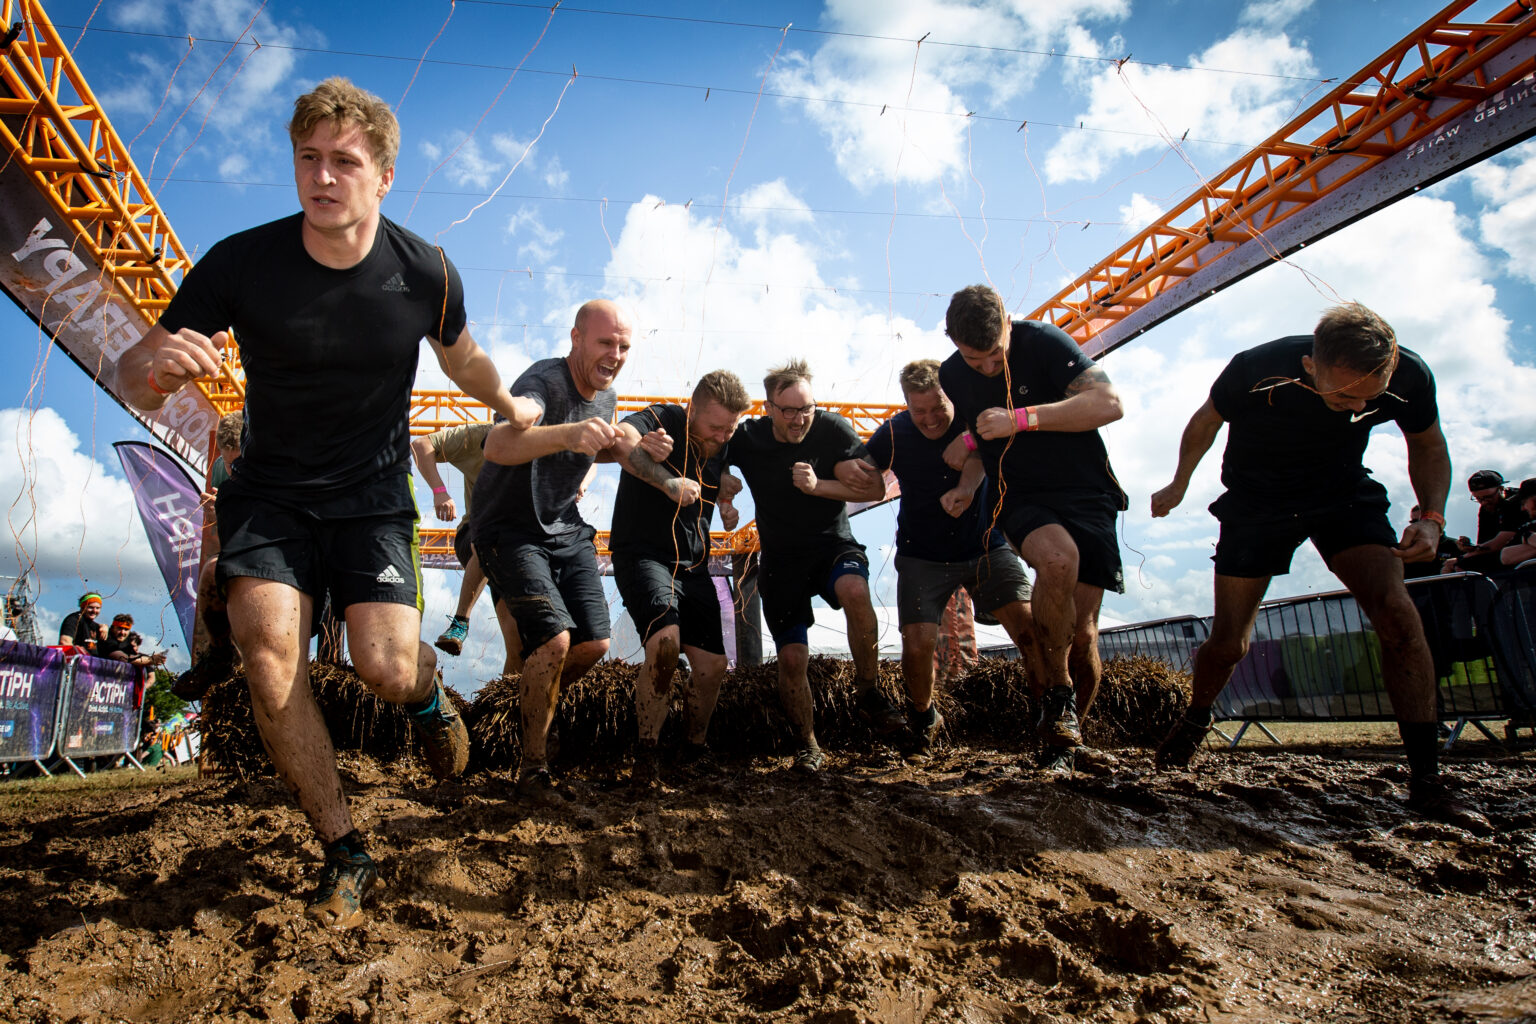 South West Tough Mudder UK Mud and Obstacle Course Run